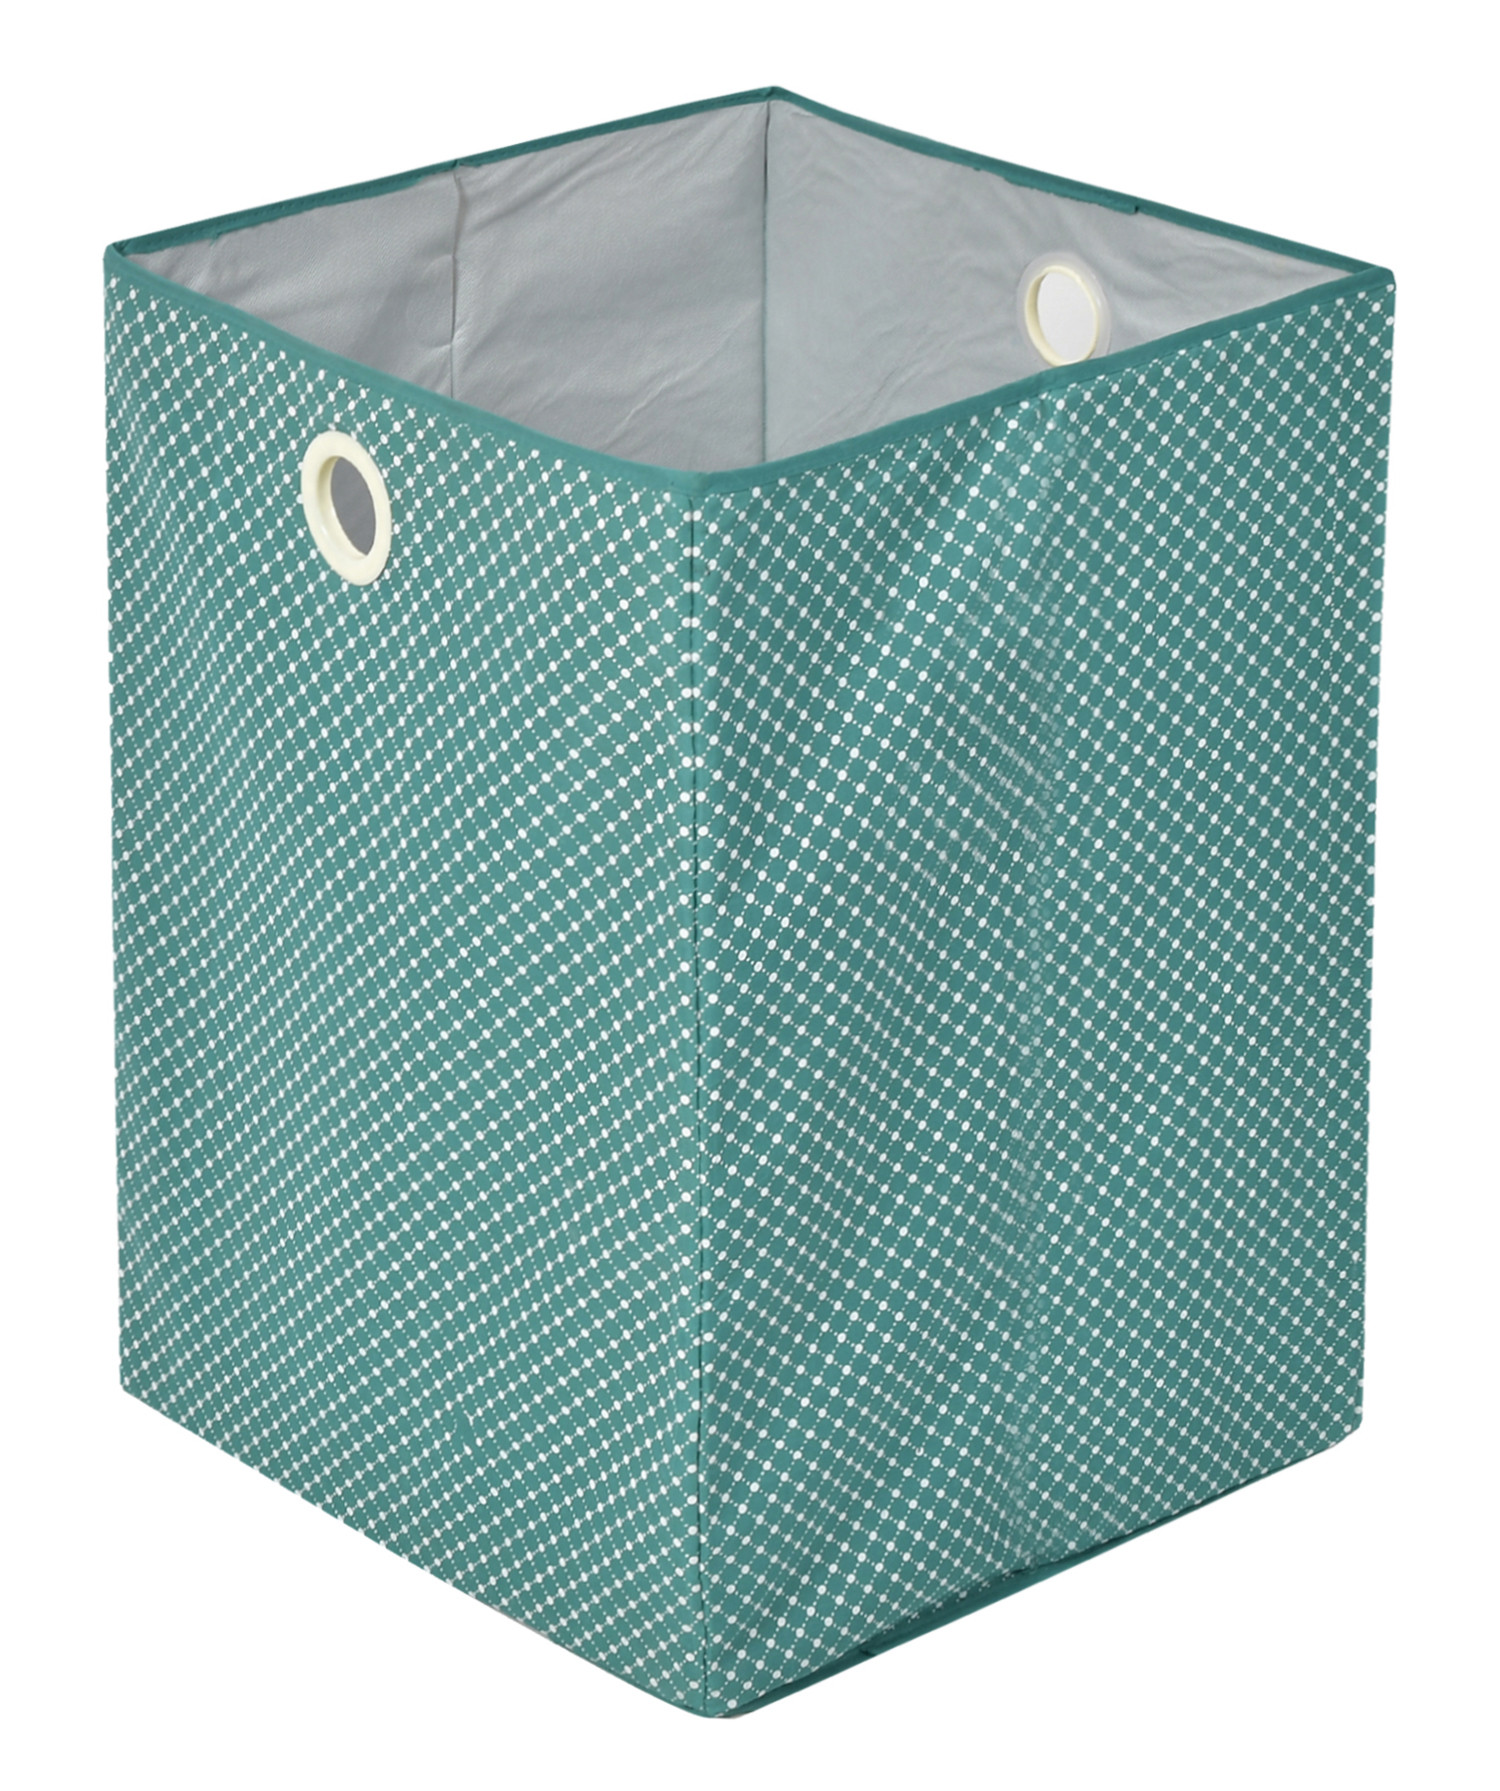 Kuber Industries Polka Dot Printed Cotton Foldable Large Laundry basket/Hamper With Handles (Green)-44KM0205